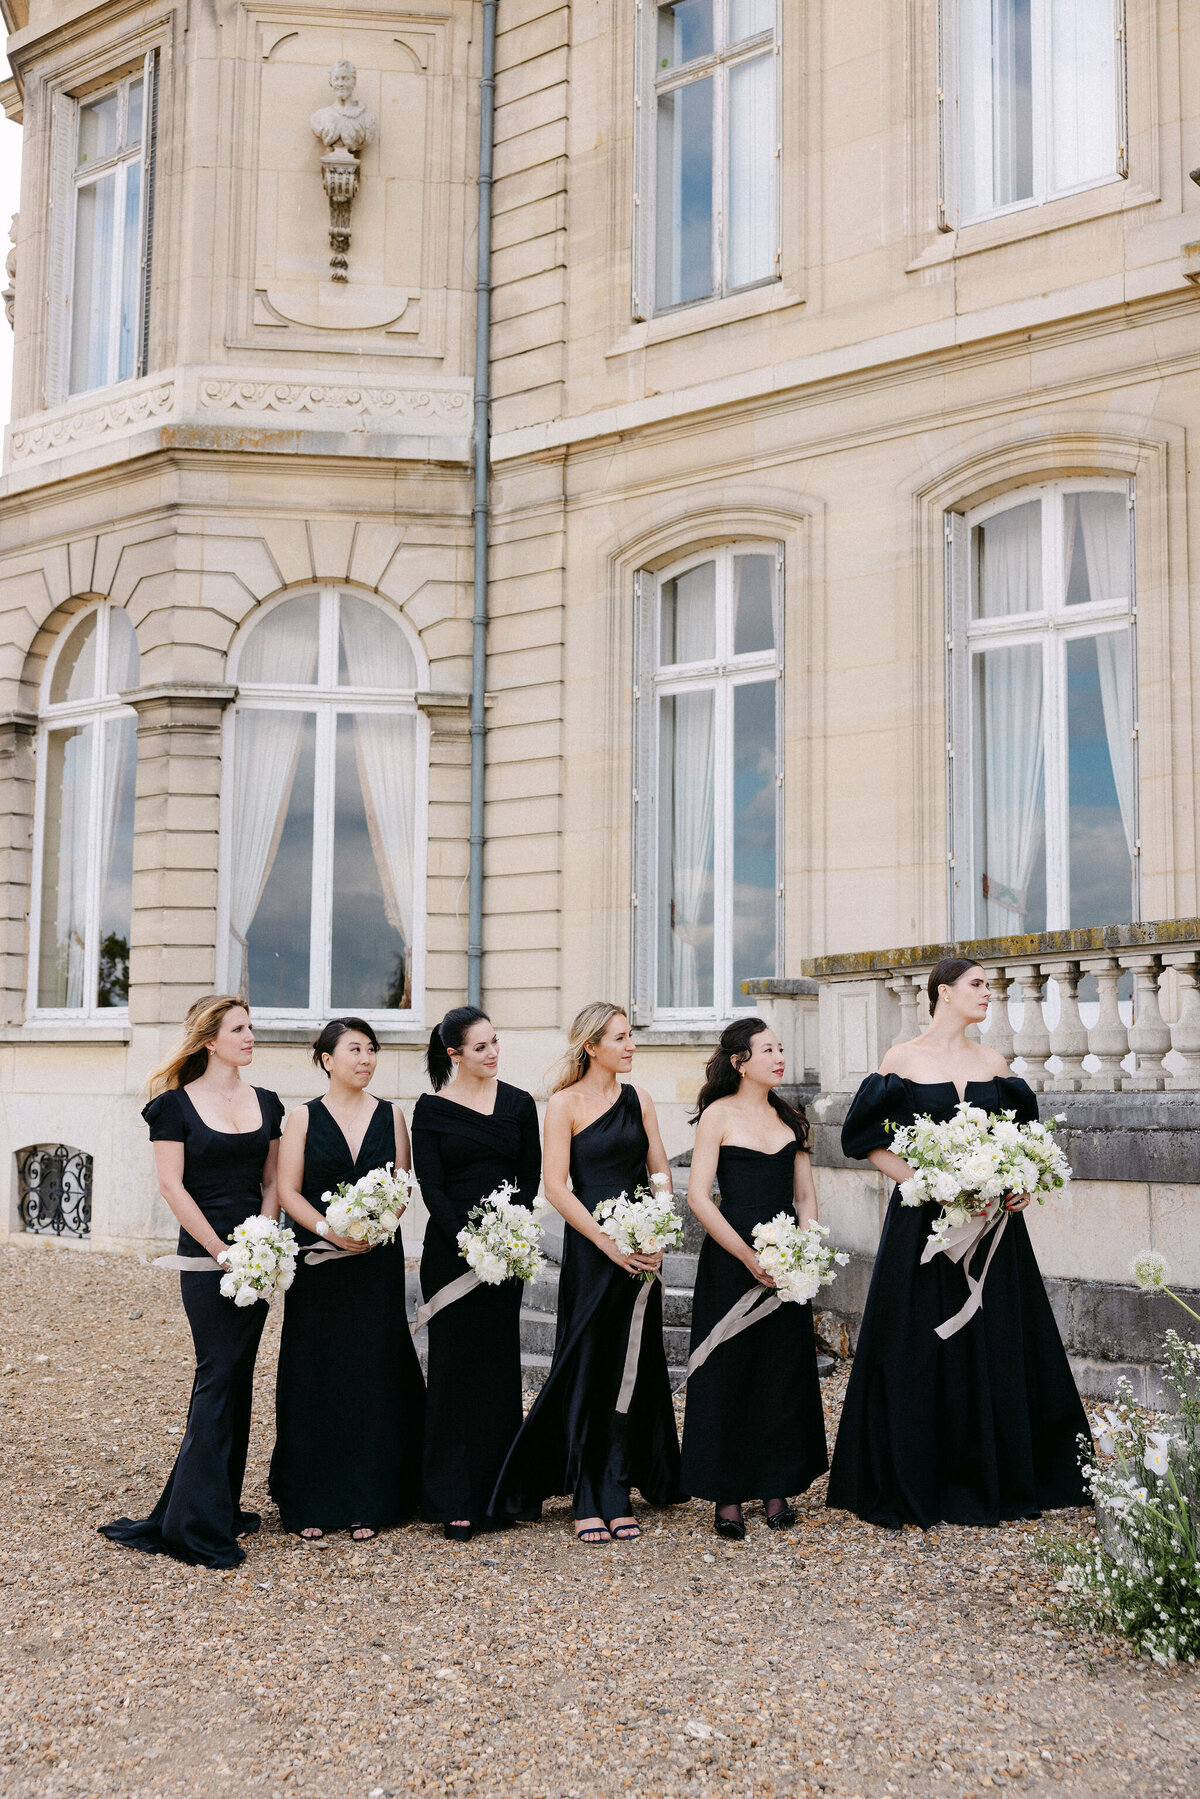 Jennifer Fox Weddings English speaking wedding planning & design agency in France crafting refined and bespoke weddings and celebrations Provence, Paris and destination 301